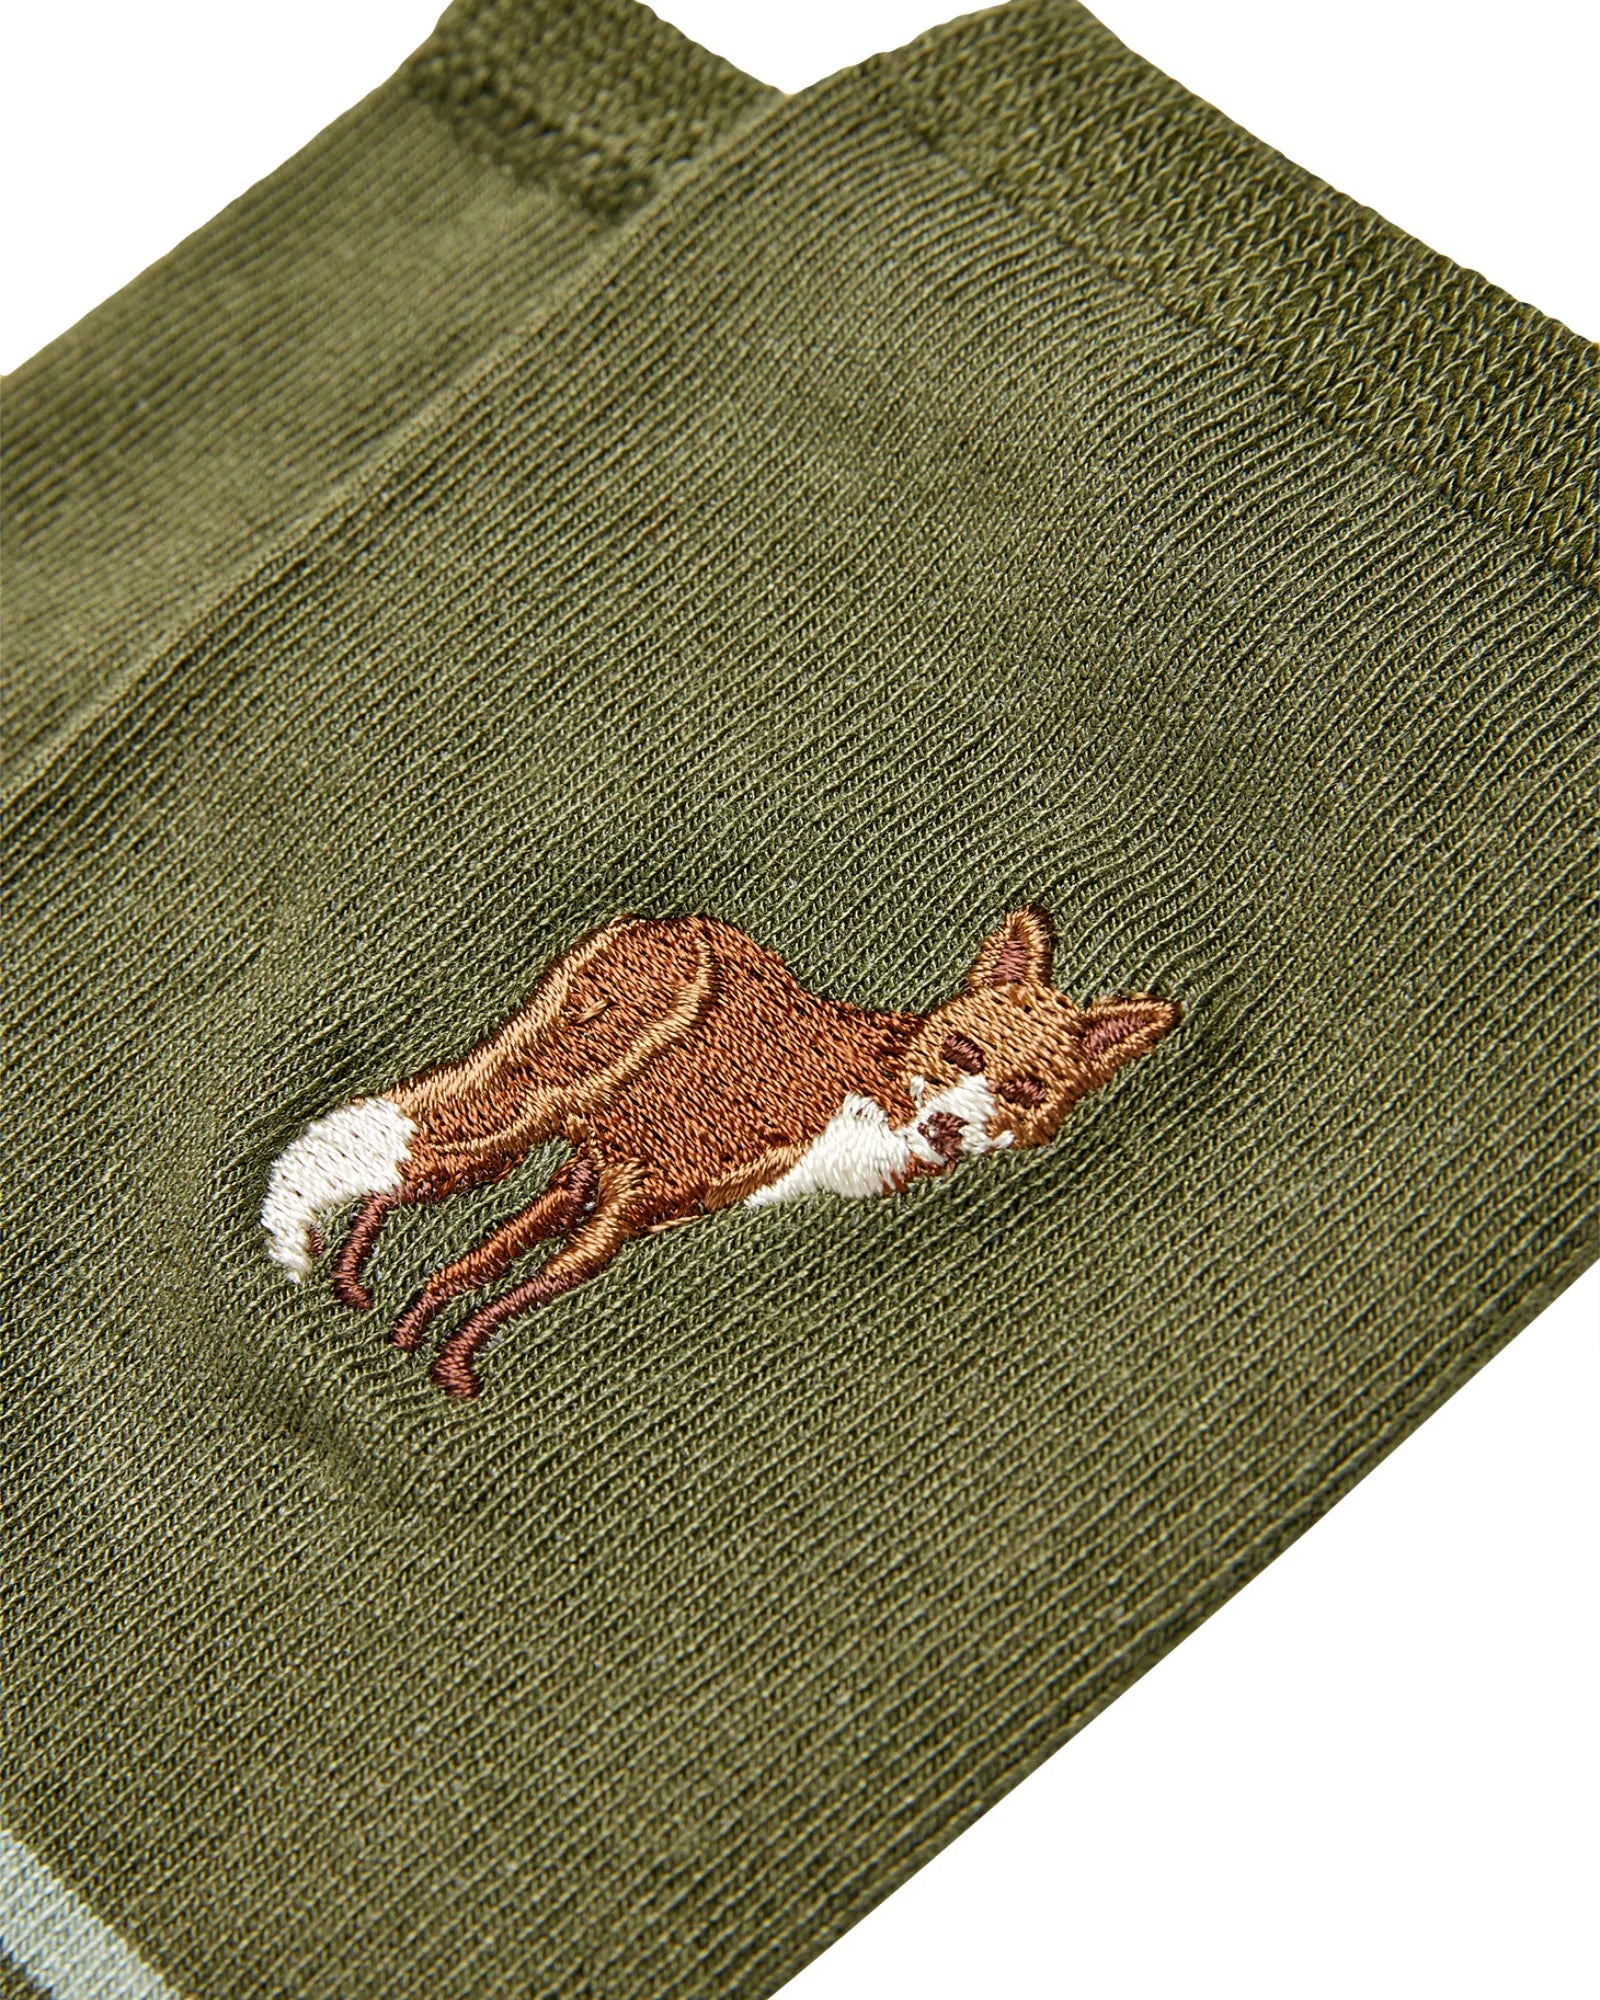 Excellent Everyday Embroidered Pair Of Socks - Green Embroidered Fox